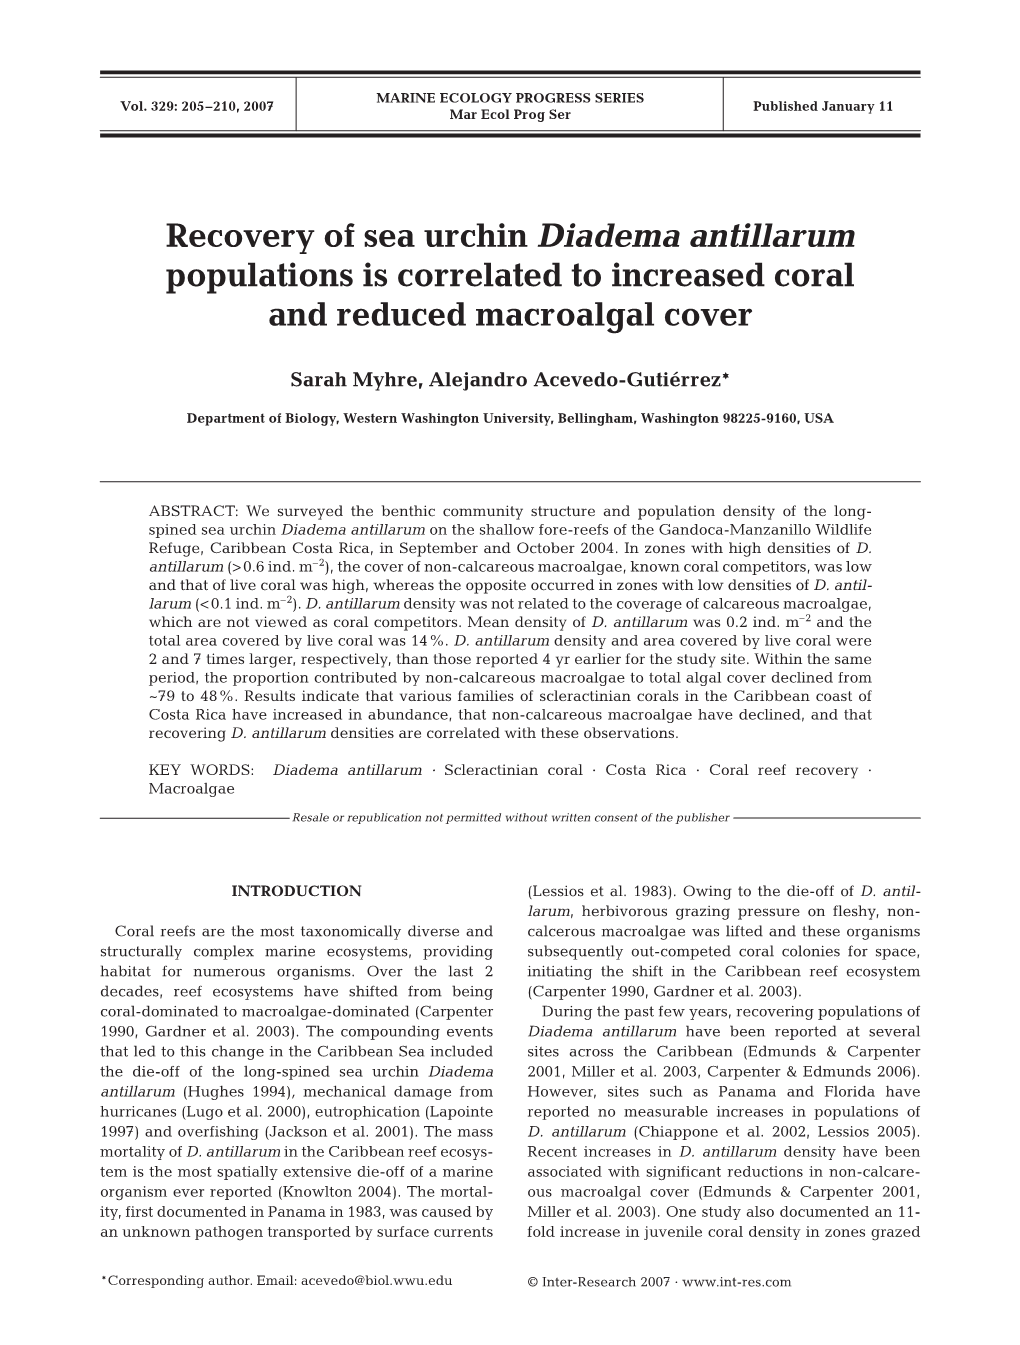 Recovery of Sea Urchin Diadema Antillarum Populations Is Correlated to Increased Coral and Reduced Macroalgal Cover